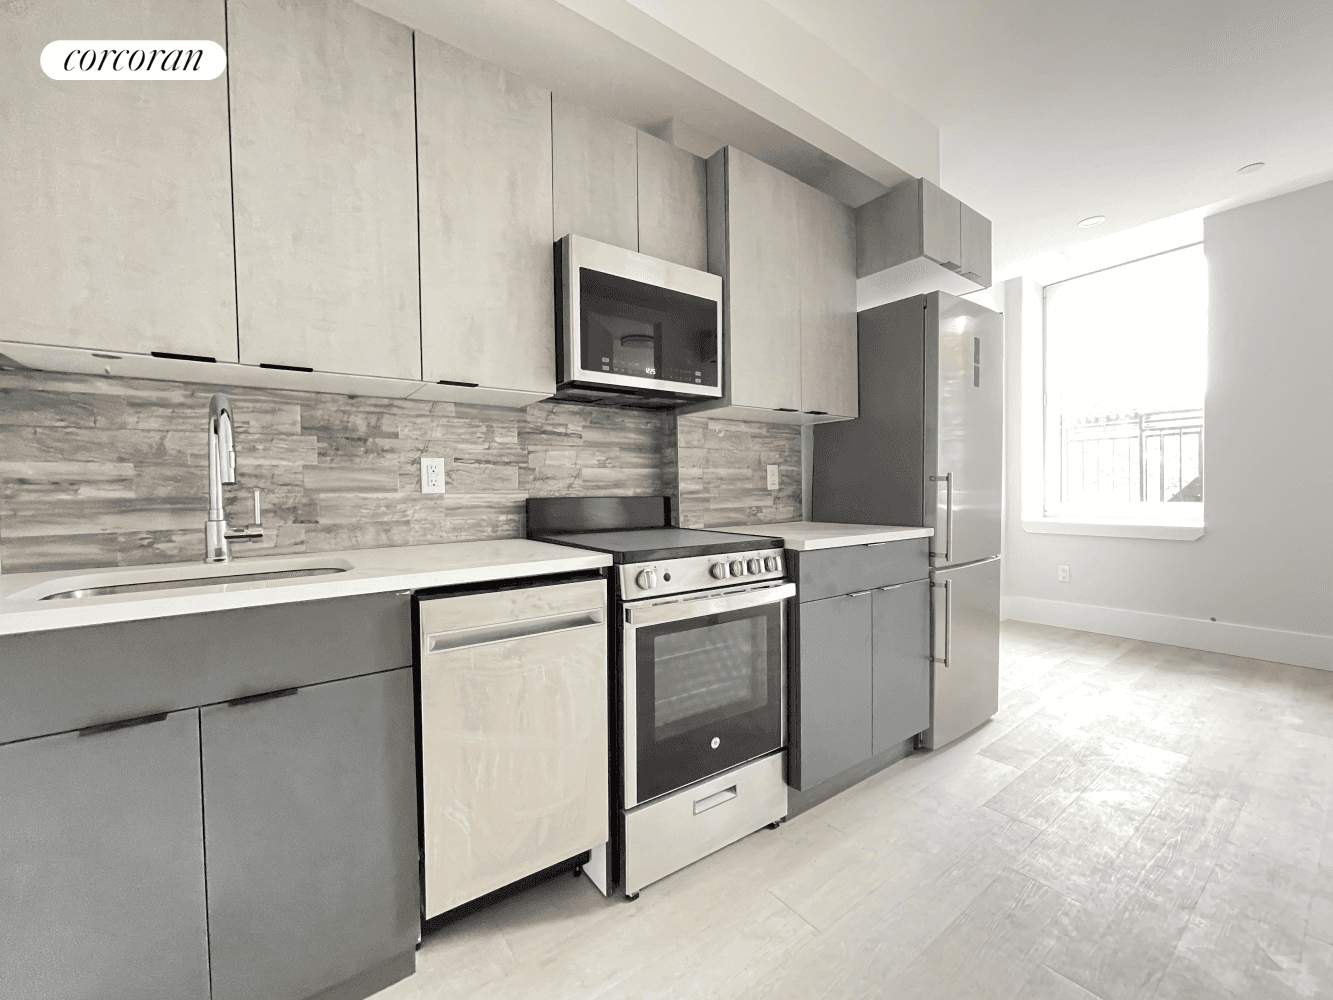 Welcome to this stunning apartment located in a brand new, fully remodeled modern building in the vibrant neighborhood of East Harlem.